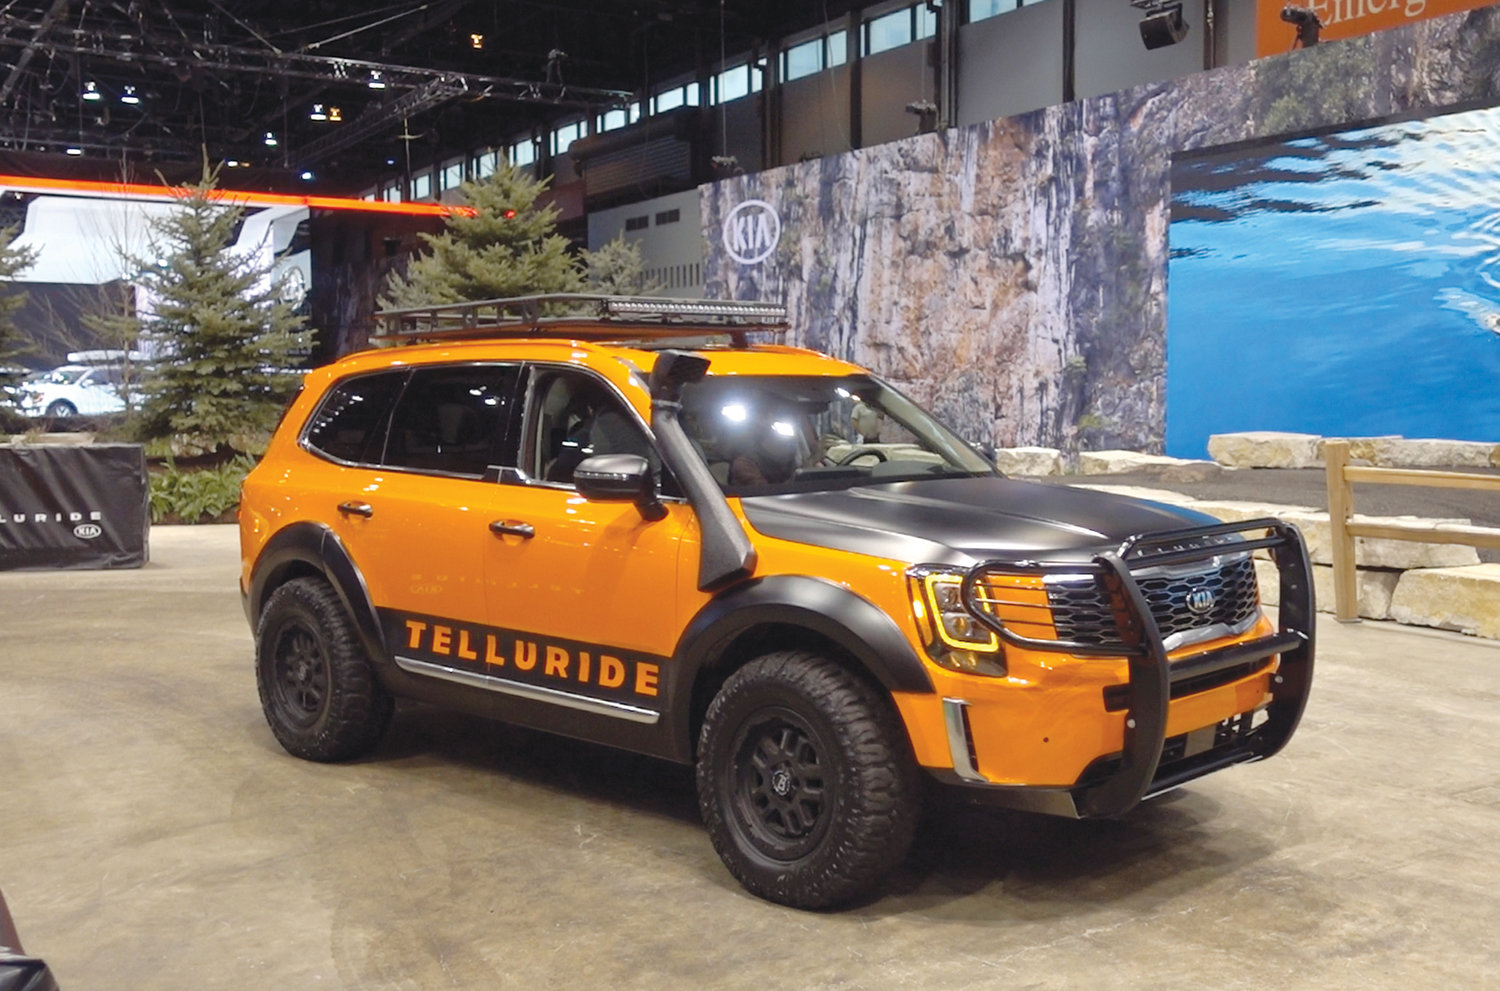 Introducing the Brand New 2020 Kia Telluride Rightfully in the Lead